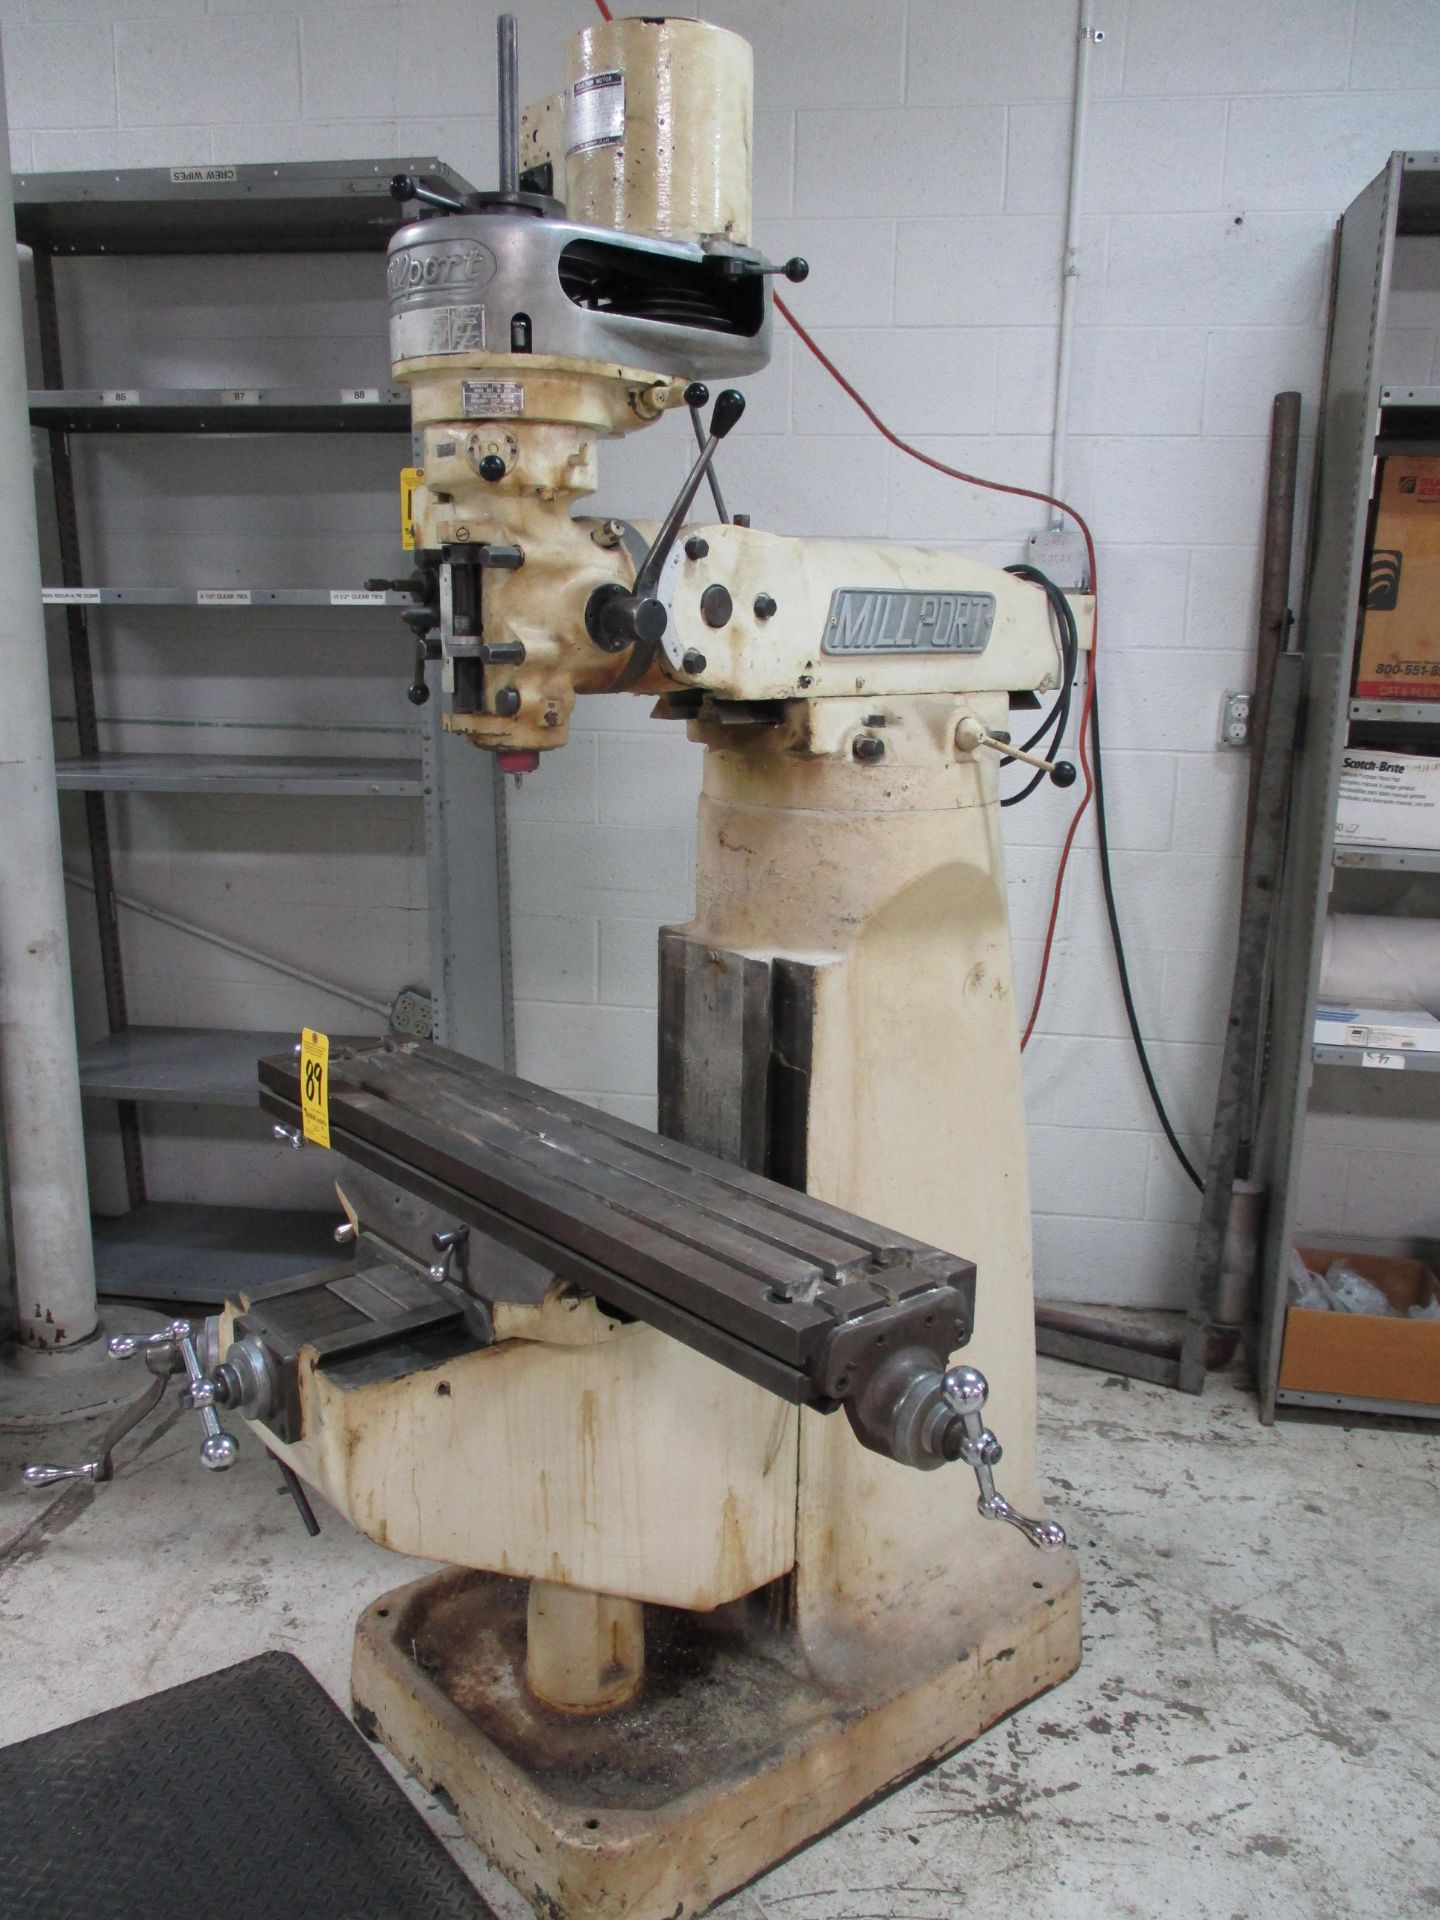 Millport Model 2S Step Pulley Vertical Mill, SN 84886, 9" x 42" Table, R-8 Spindle, 2 HP - Image 2 of 6